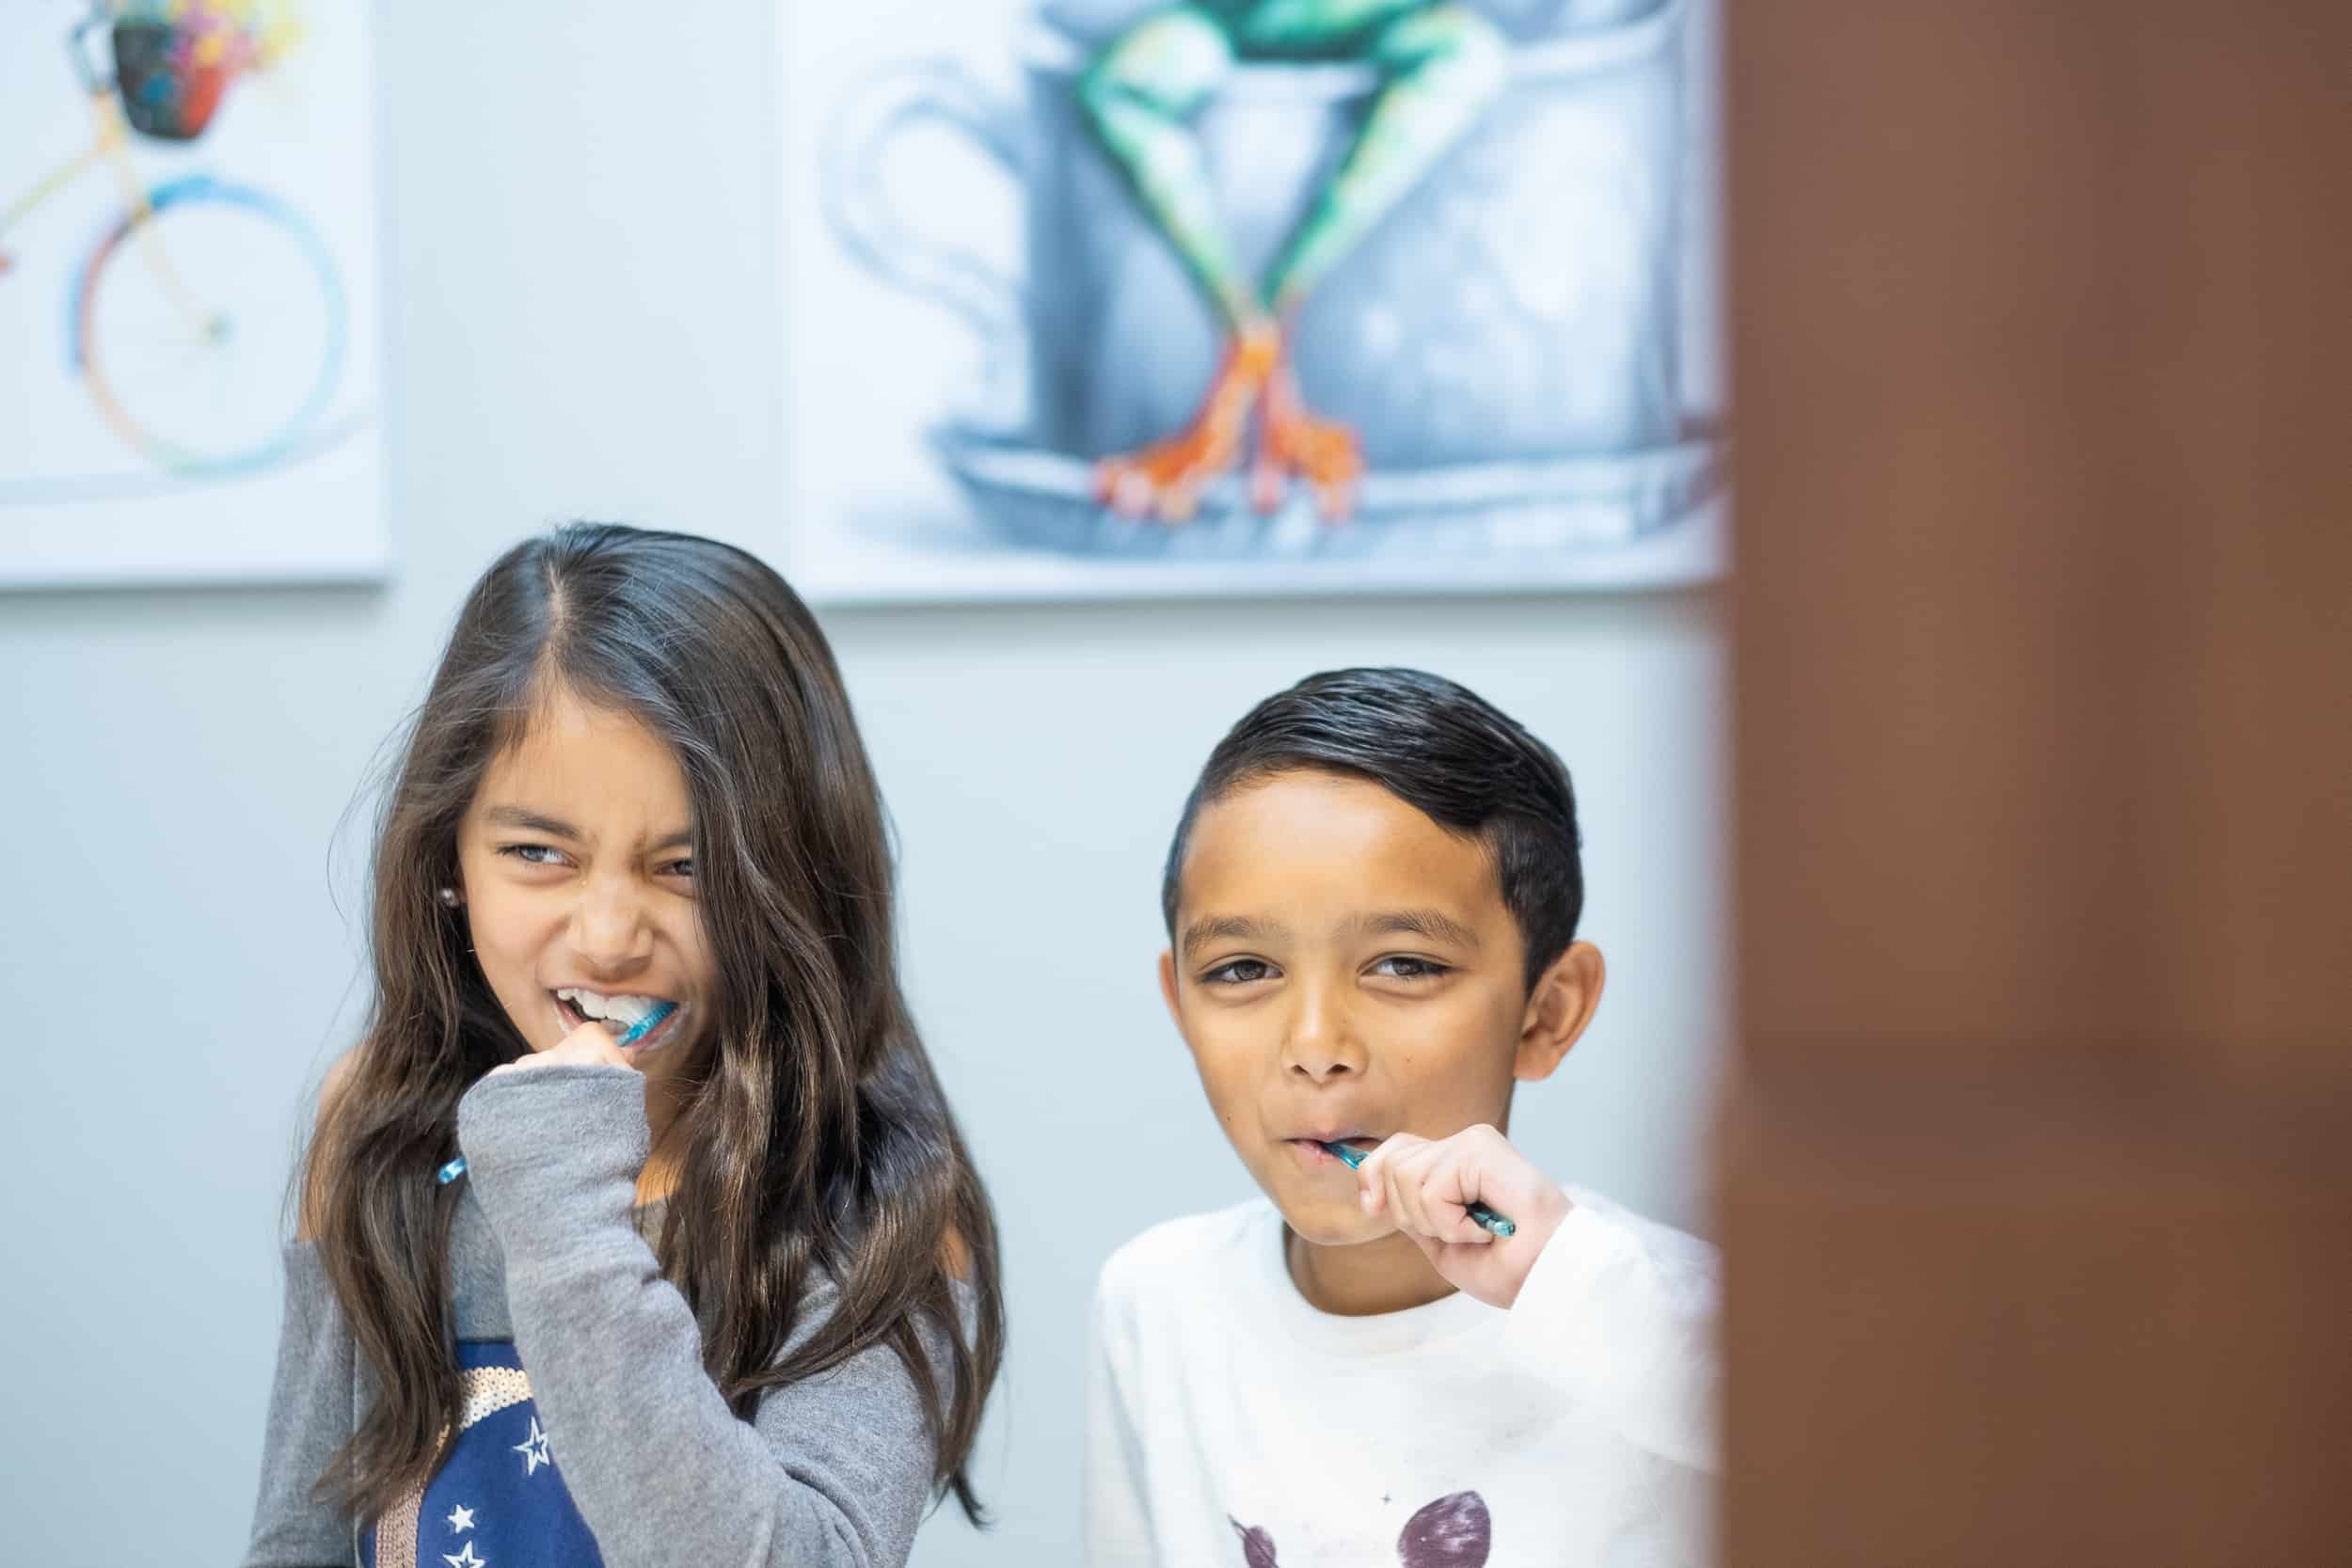 Patients Magic Smiles Dentistry 2019 El Dorado Hills California Dentist 23 1 - Want to Get Kids to Brush? Here’s How!